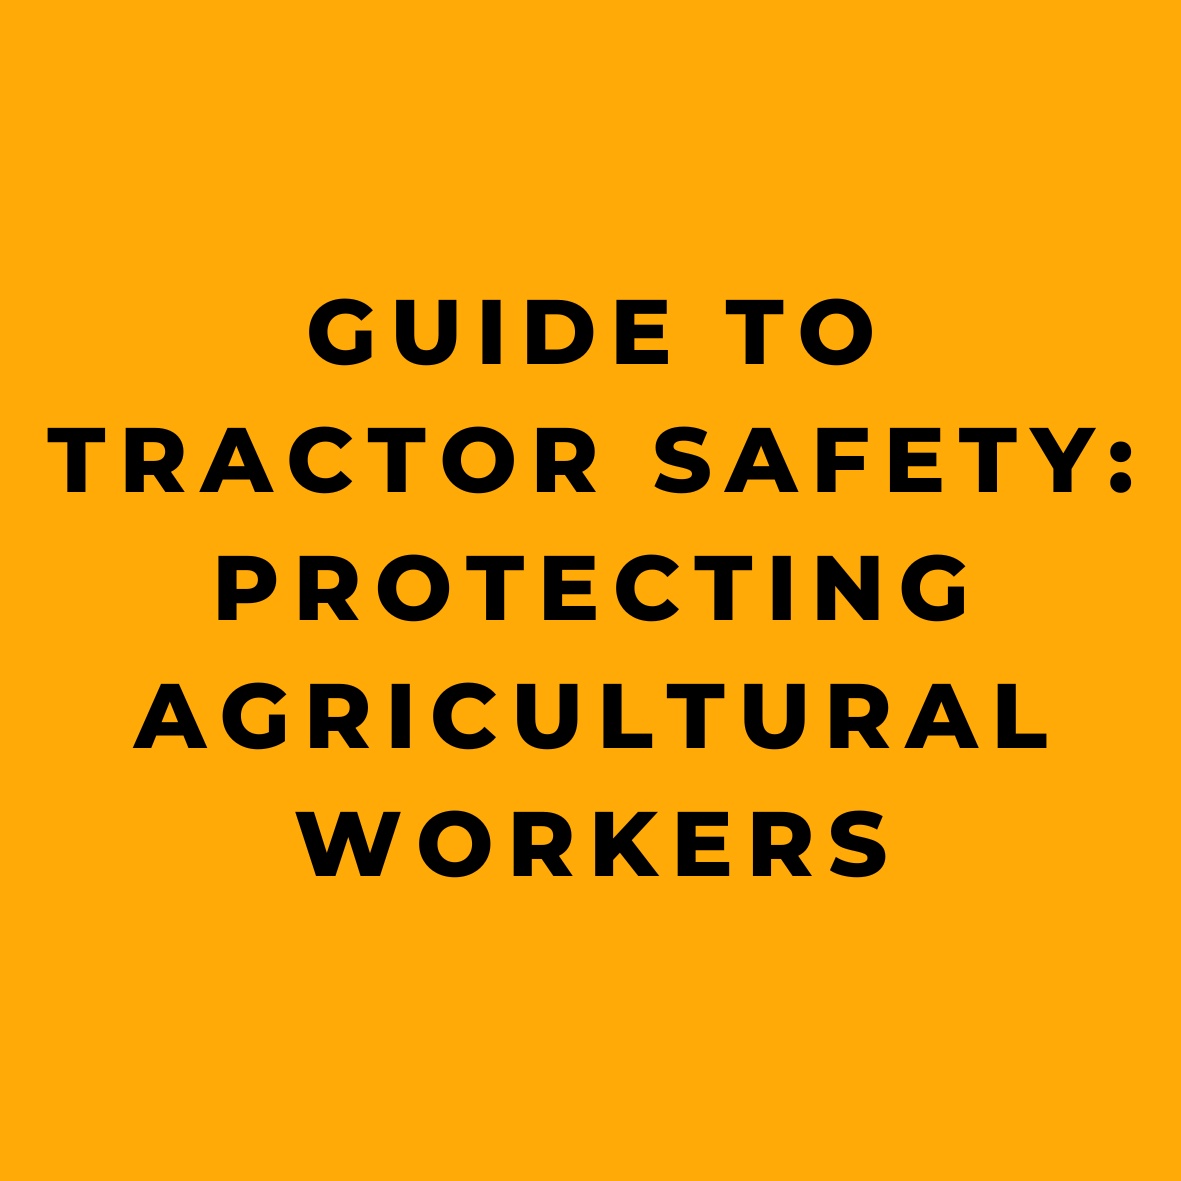 Guide to Tractor Safety Protecting Agricultural Workers